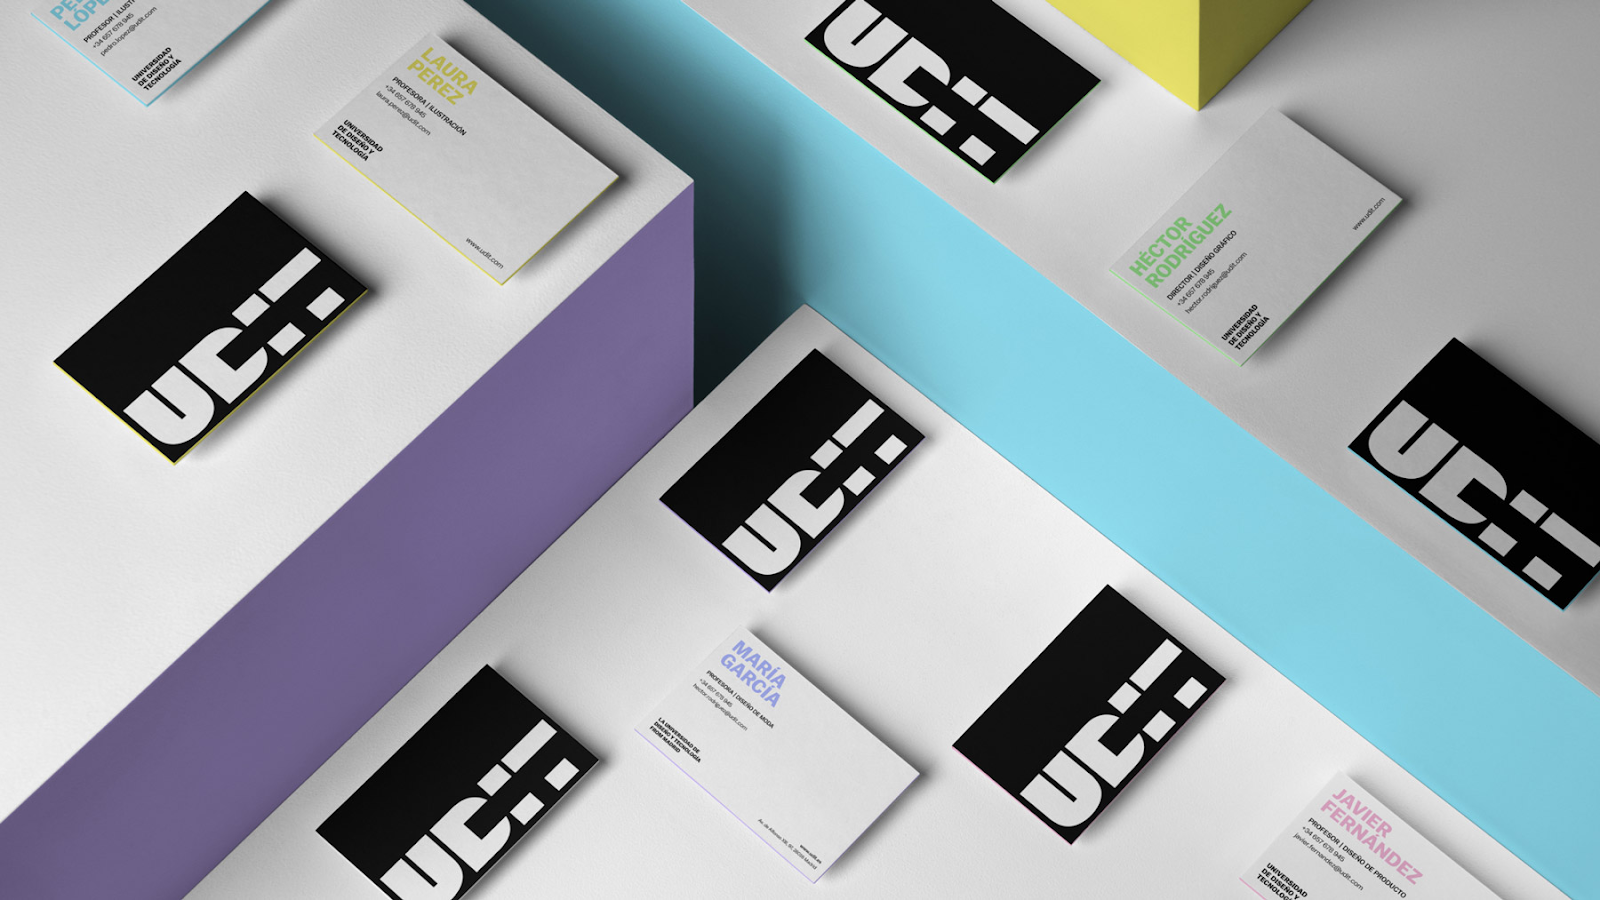 Artifact from the UDIT’s Bold and Playful Branding by Erretres article on Abduzeedo